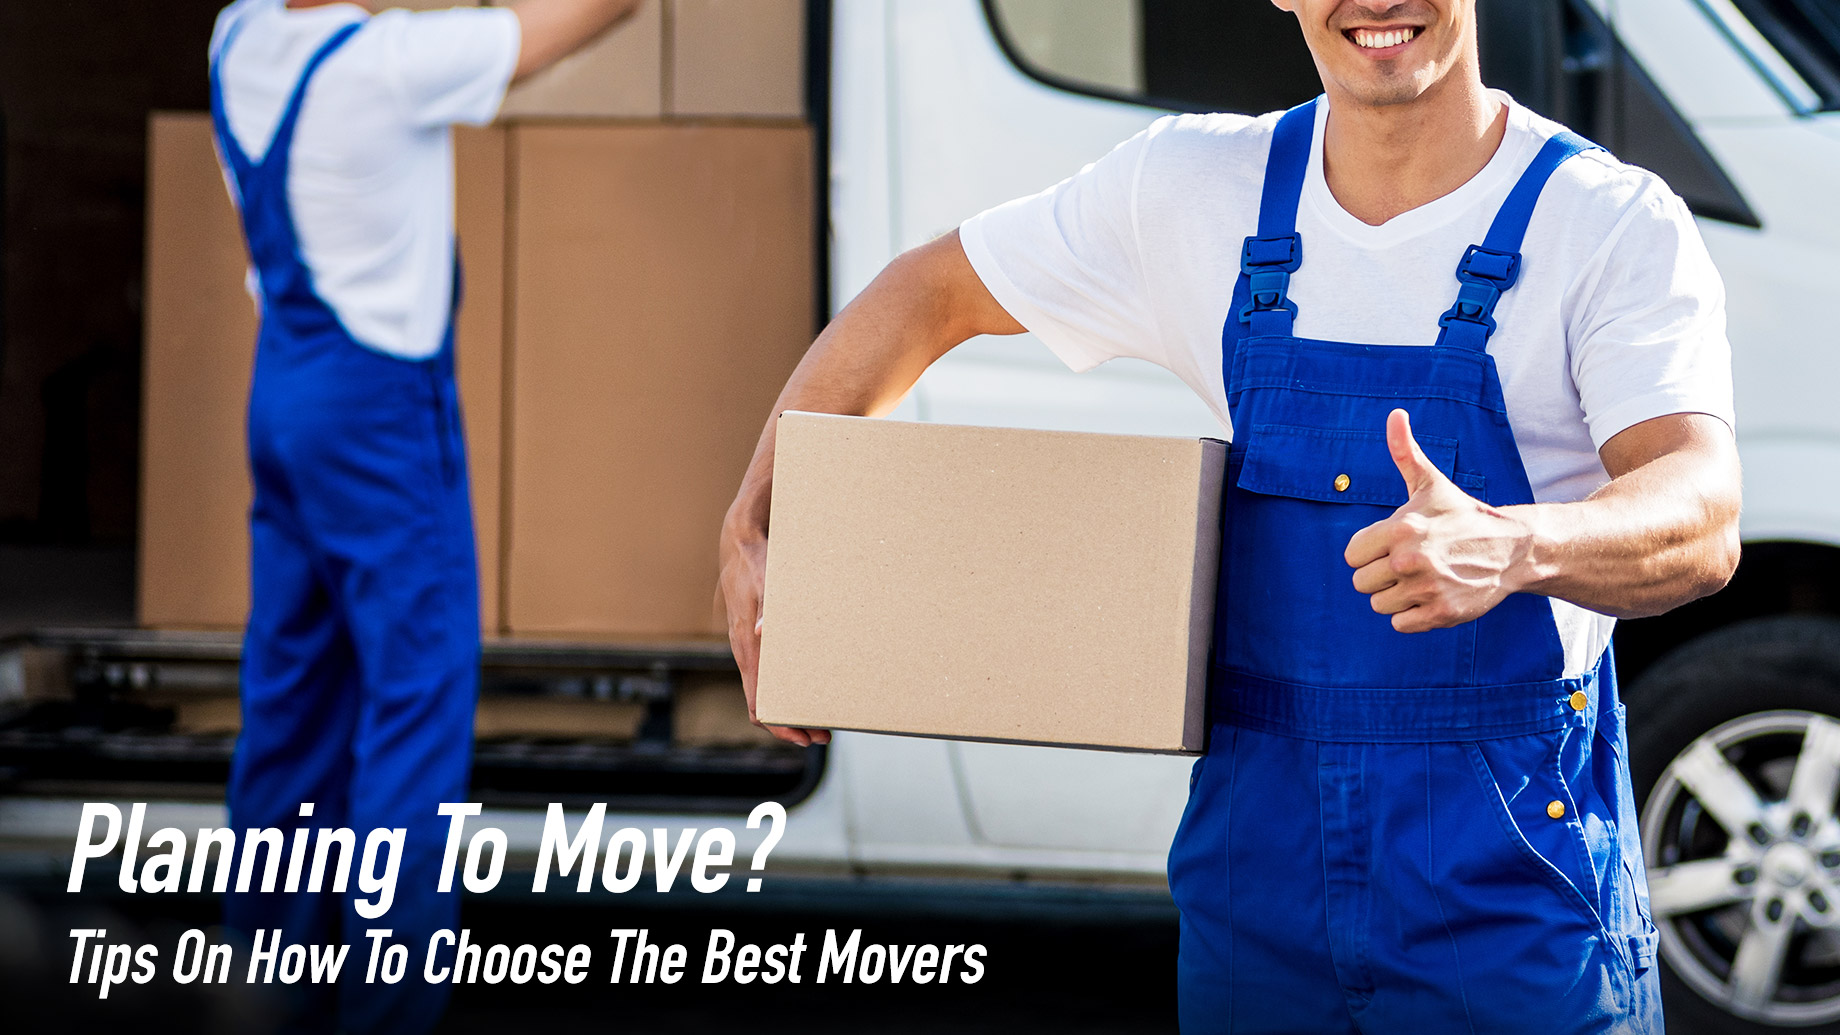 Planning To Move? Tips On How To Choose The Best Movers